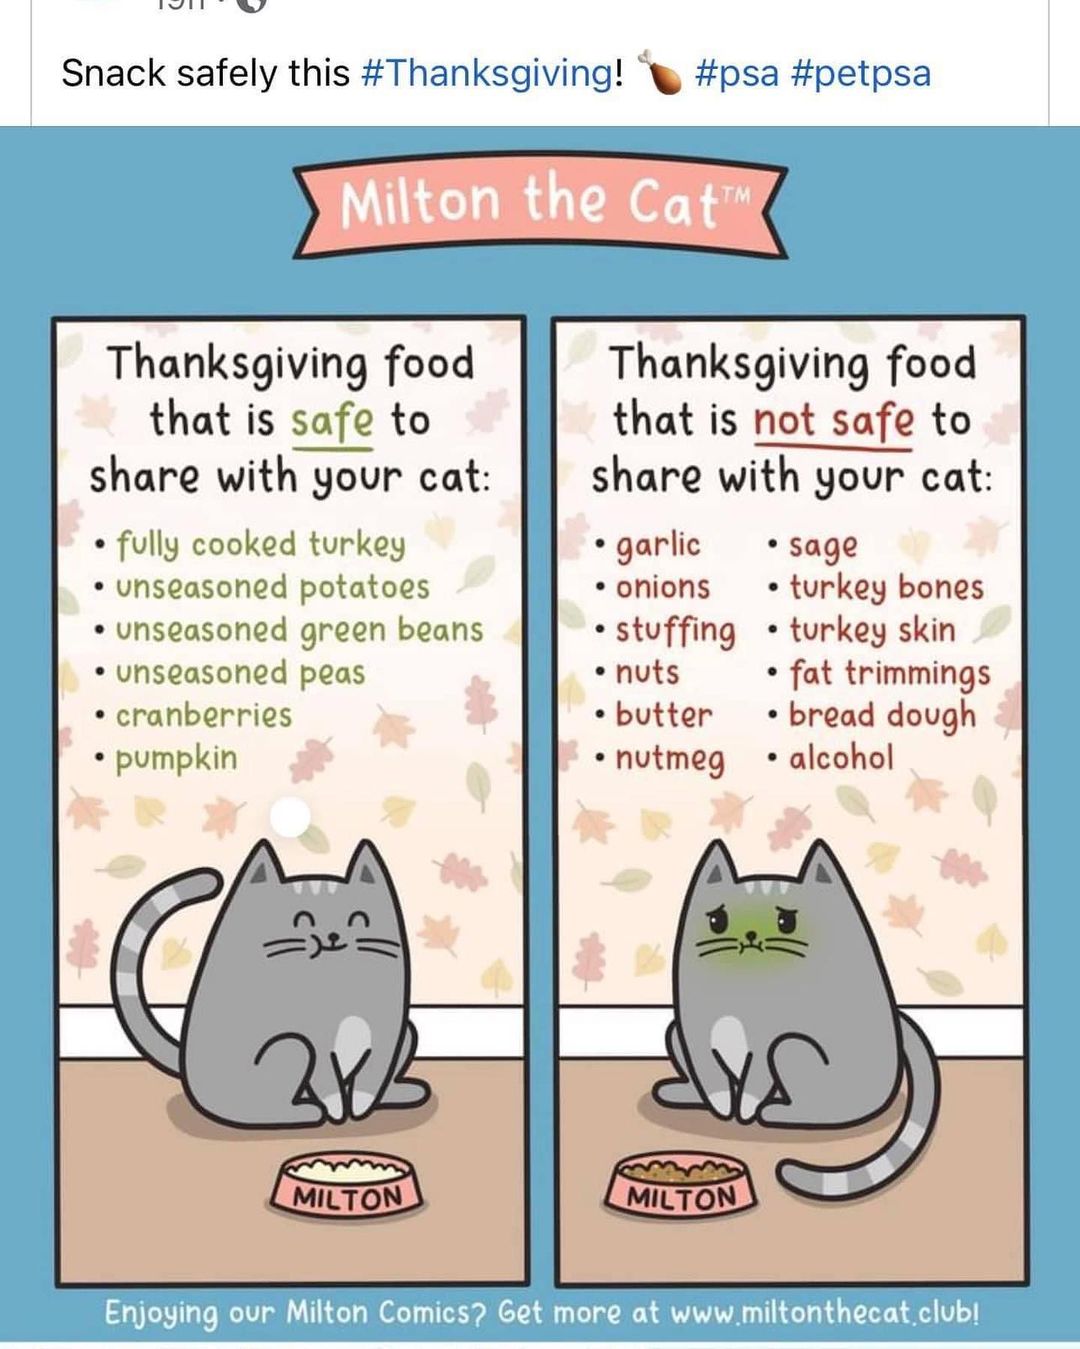 What to feed your cat and what to NOT feed your cat on thanksgiving!